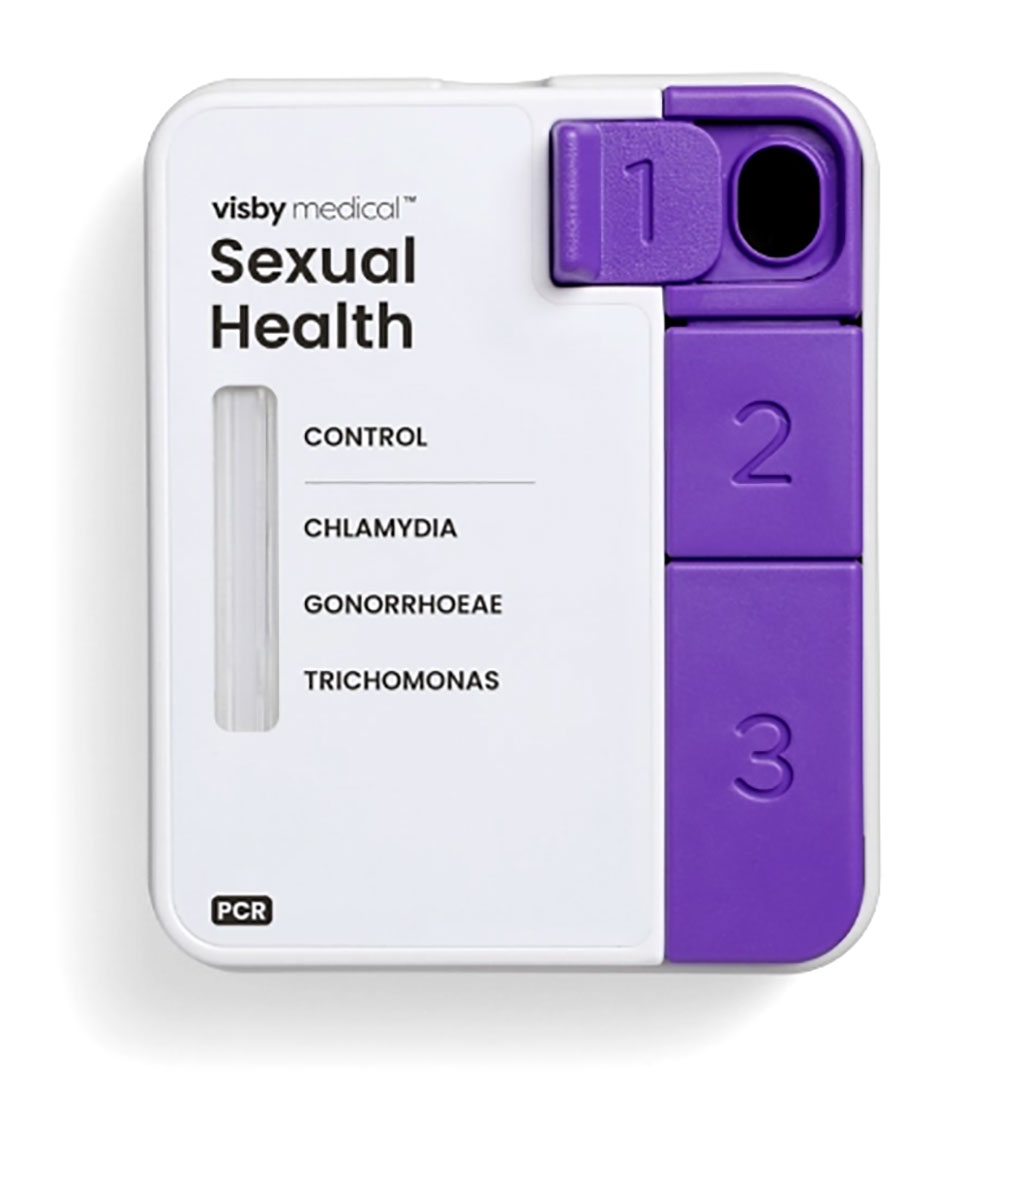 Image: Sexual Health Click Test (Photo courtesy of Visby Medical)